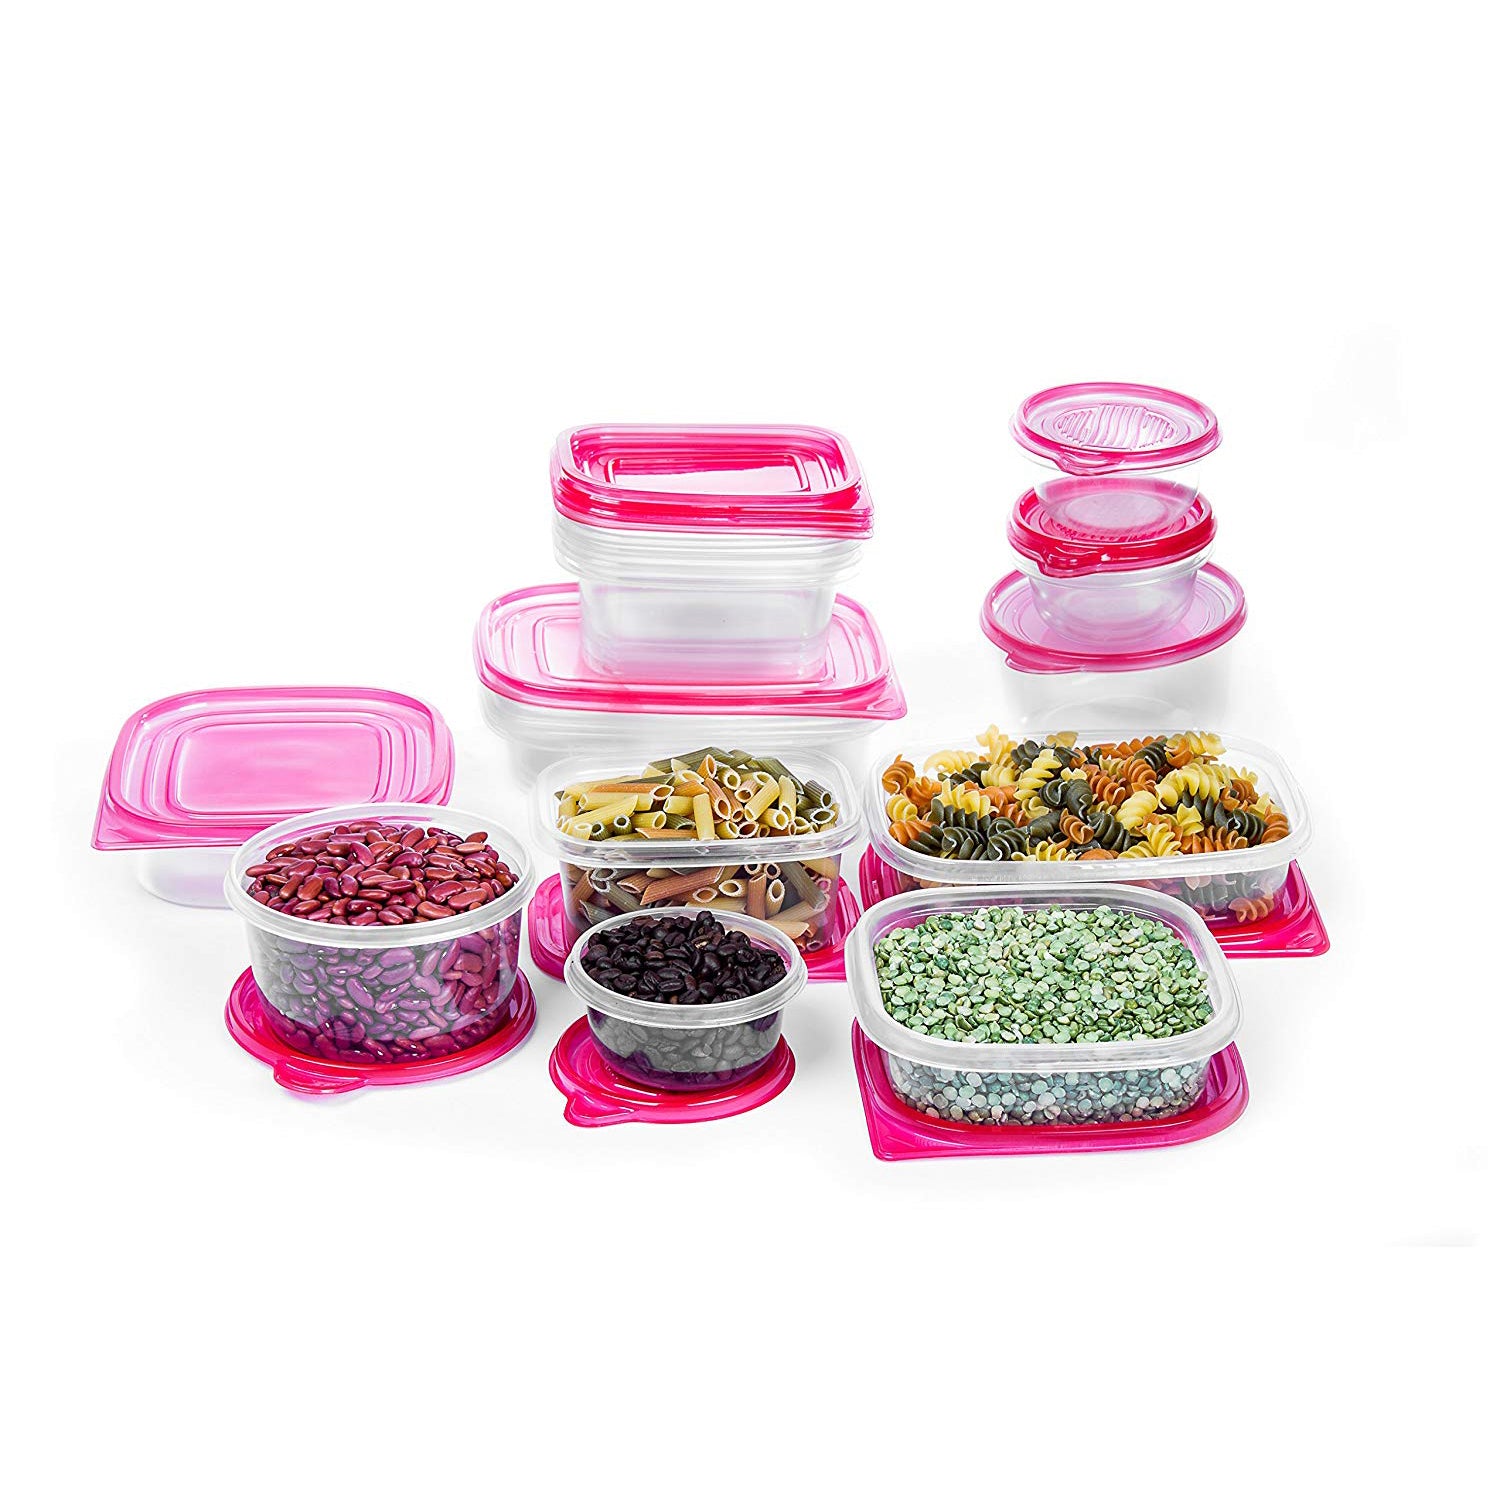 34 Pc Plastic Food Containers Set - 17 Storage Leftovers Container w/ Red Lids